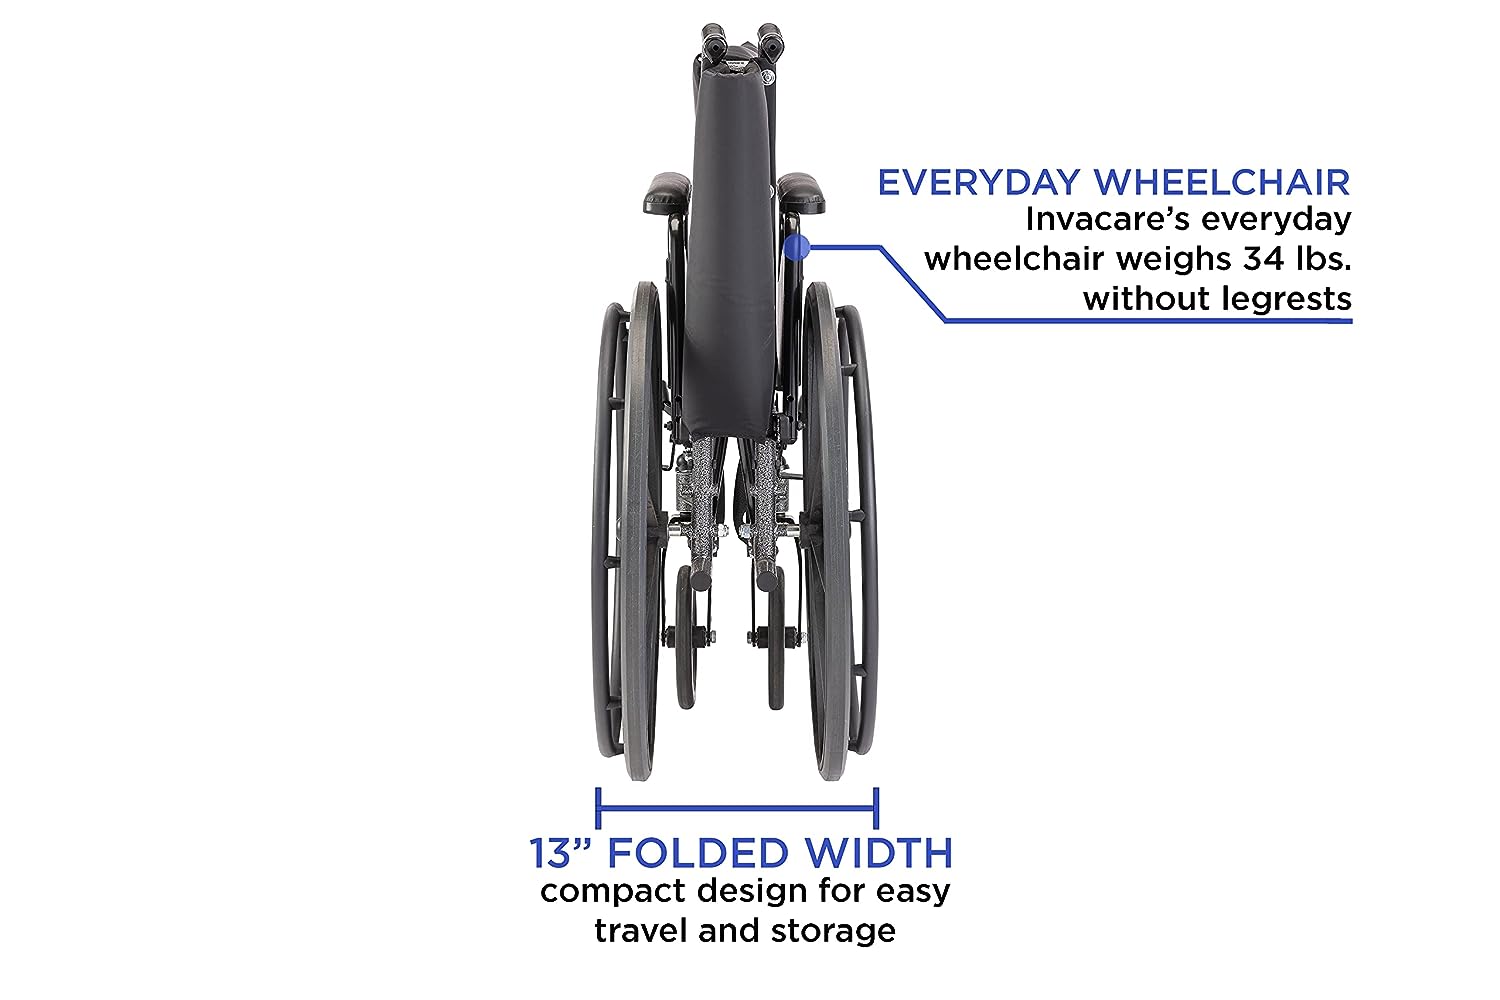 Invacare's Tracer SX5 wheelchair for adults is folded to represent the 13" folding width as a compact design for travel and storage.  The image is against a white background.